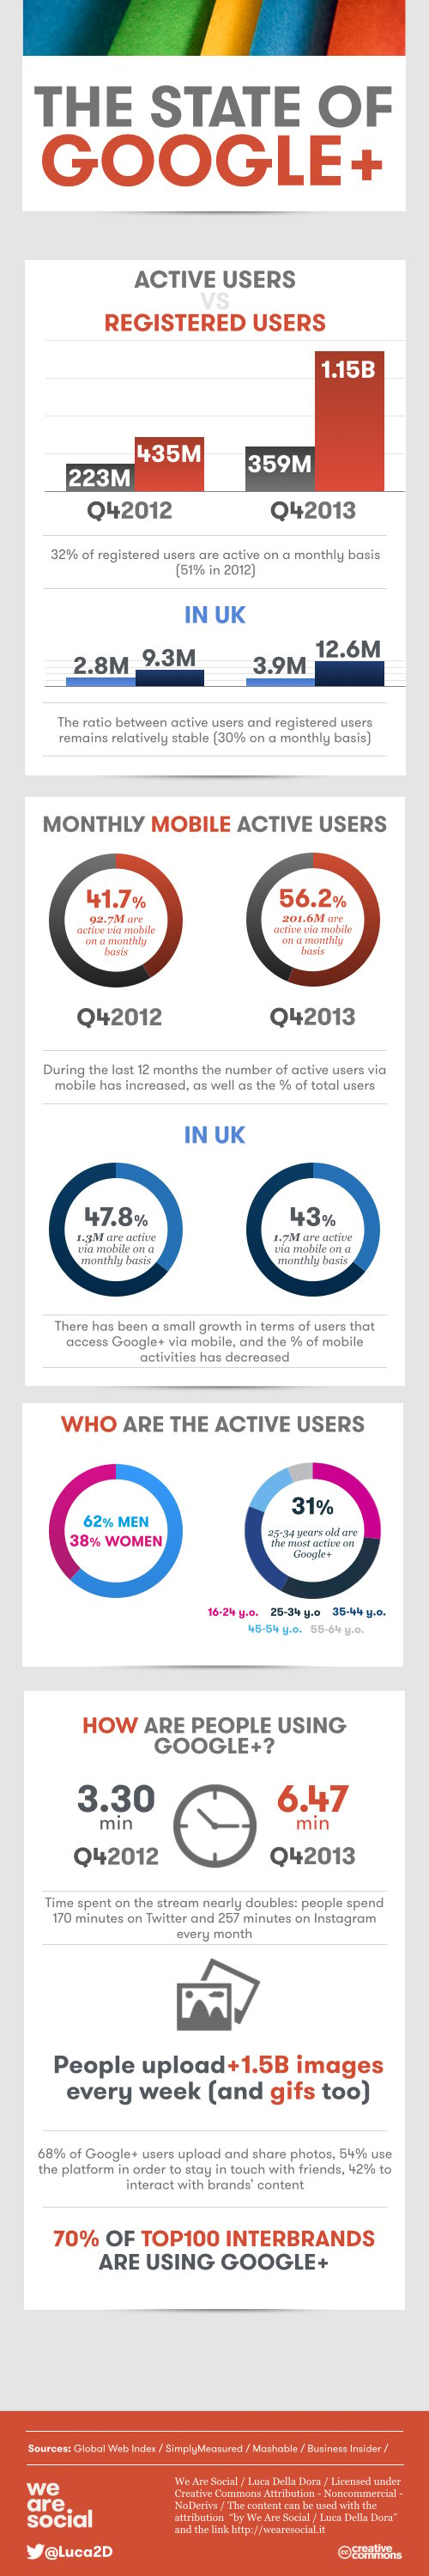 Google+ active users